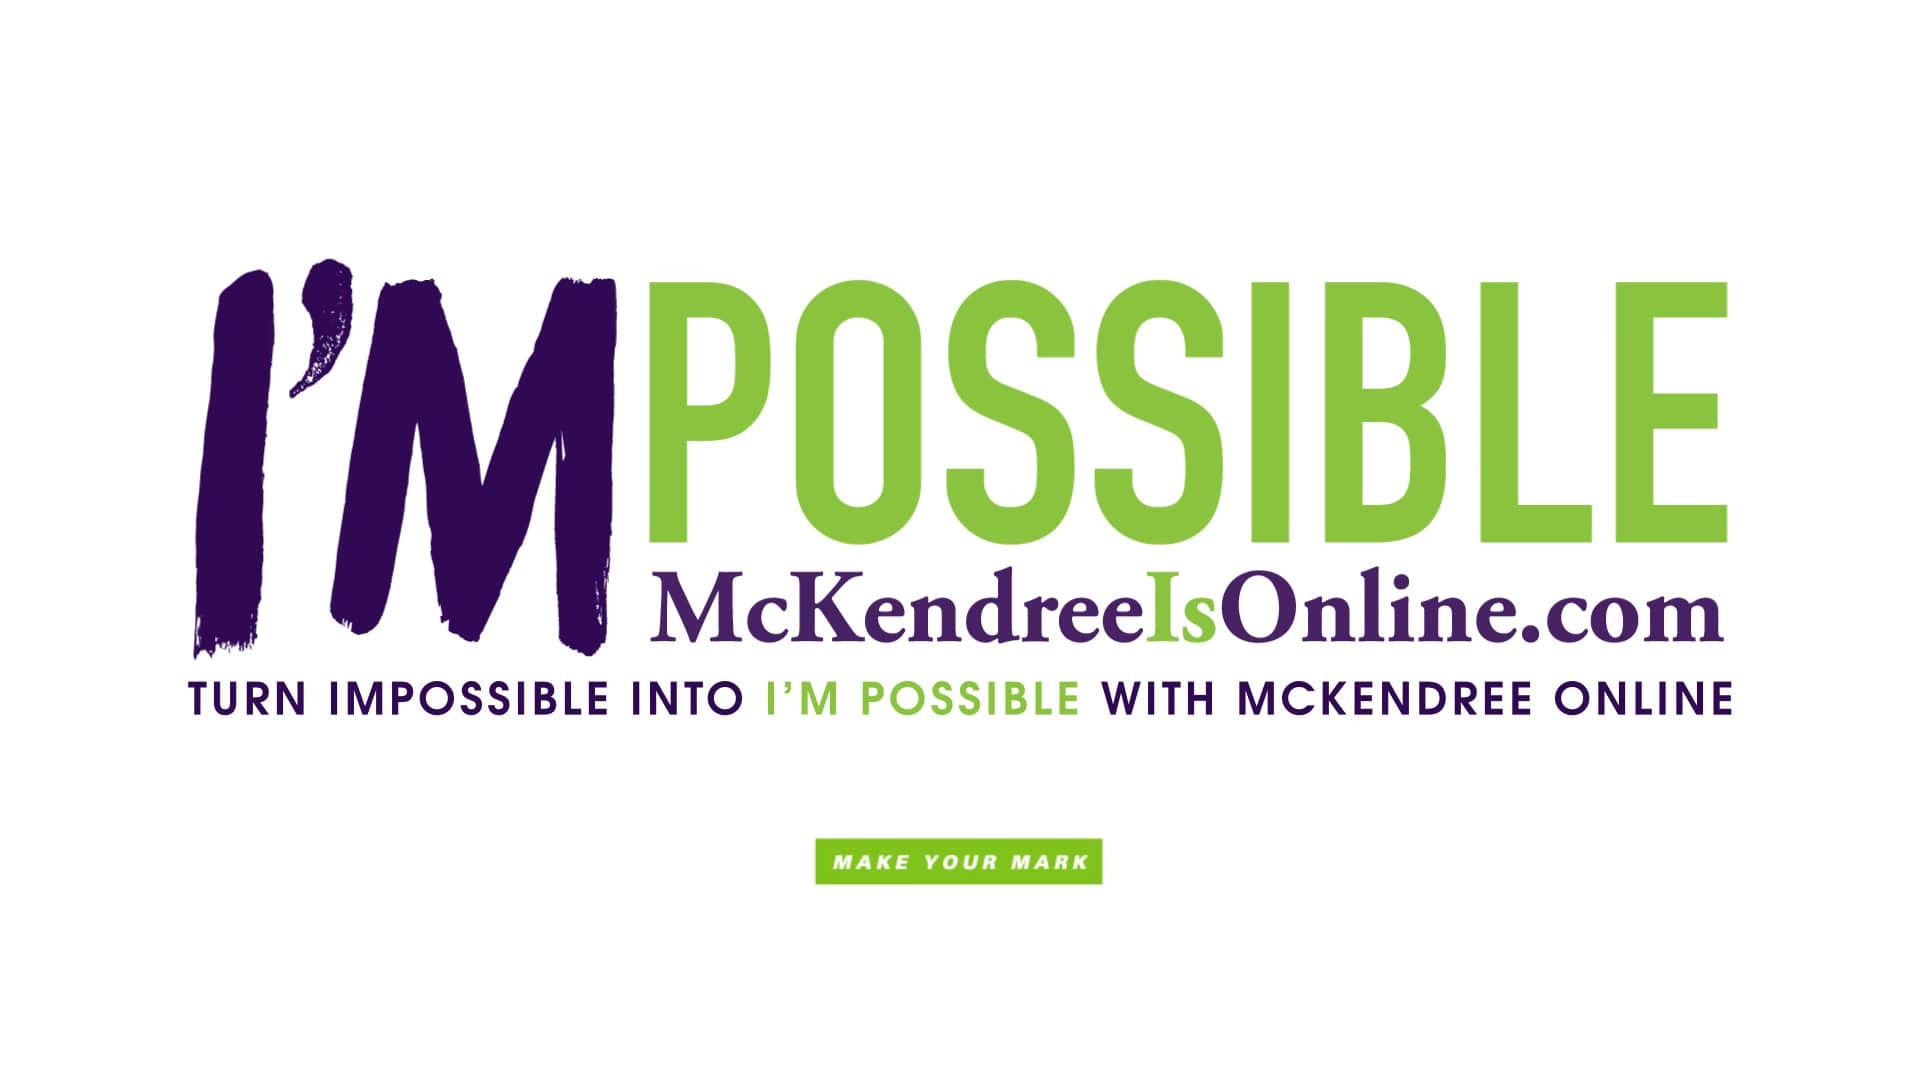 Five Myths About McKendree Online